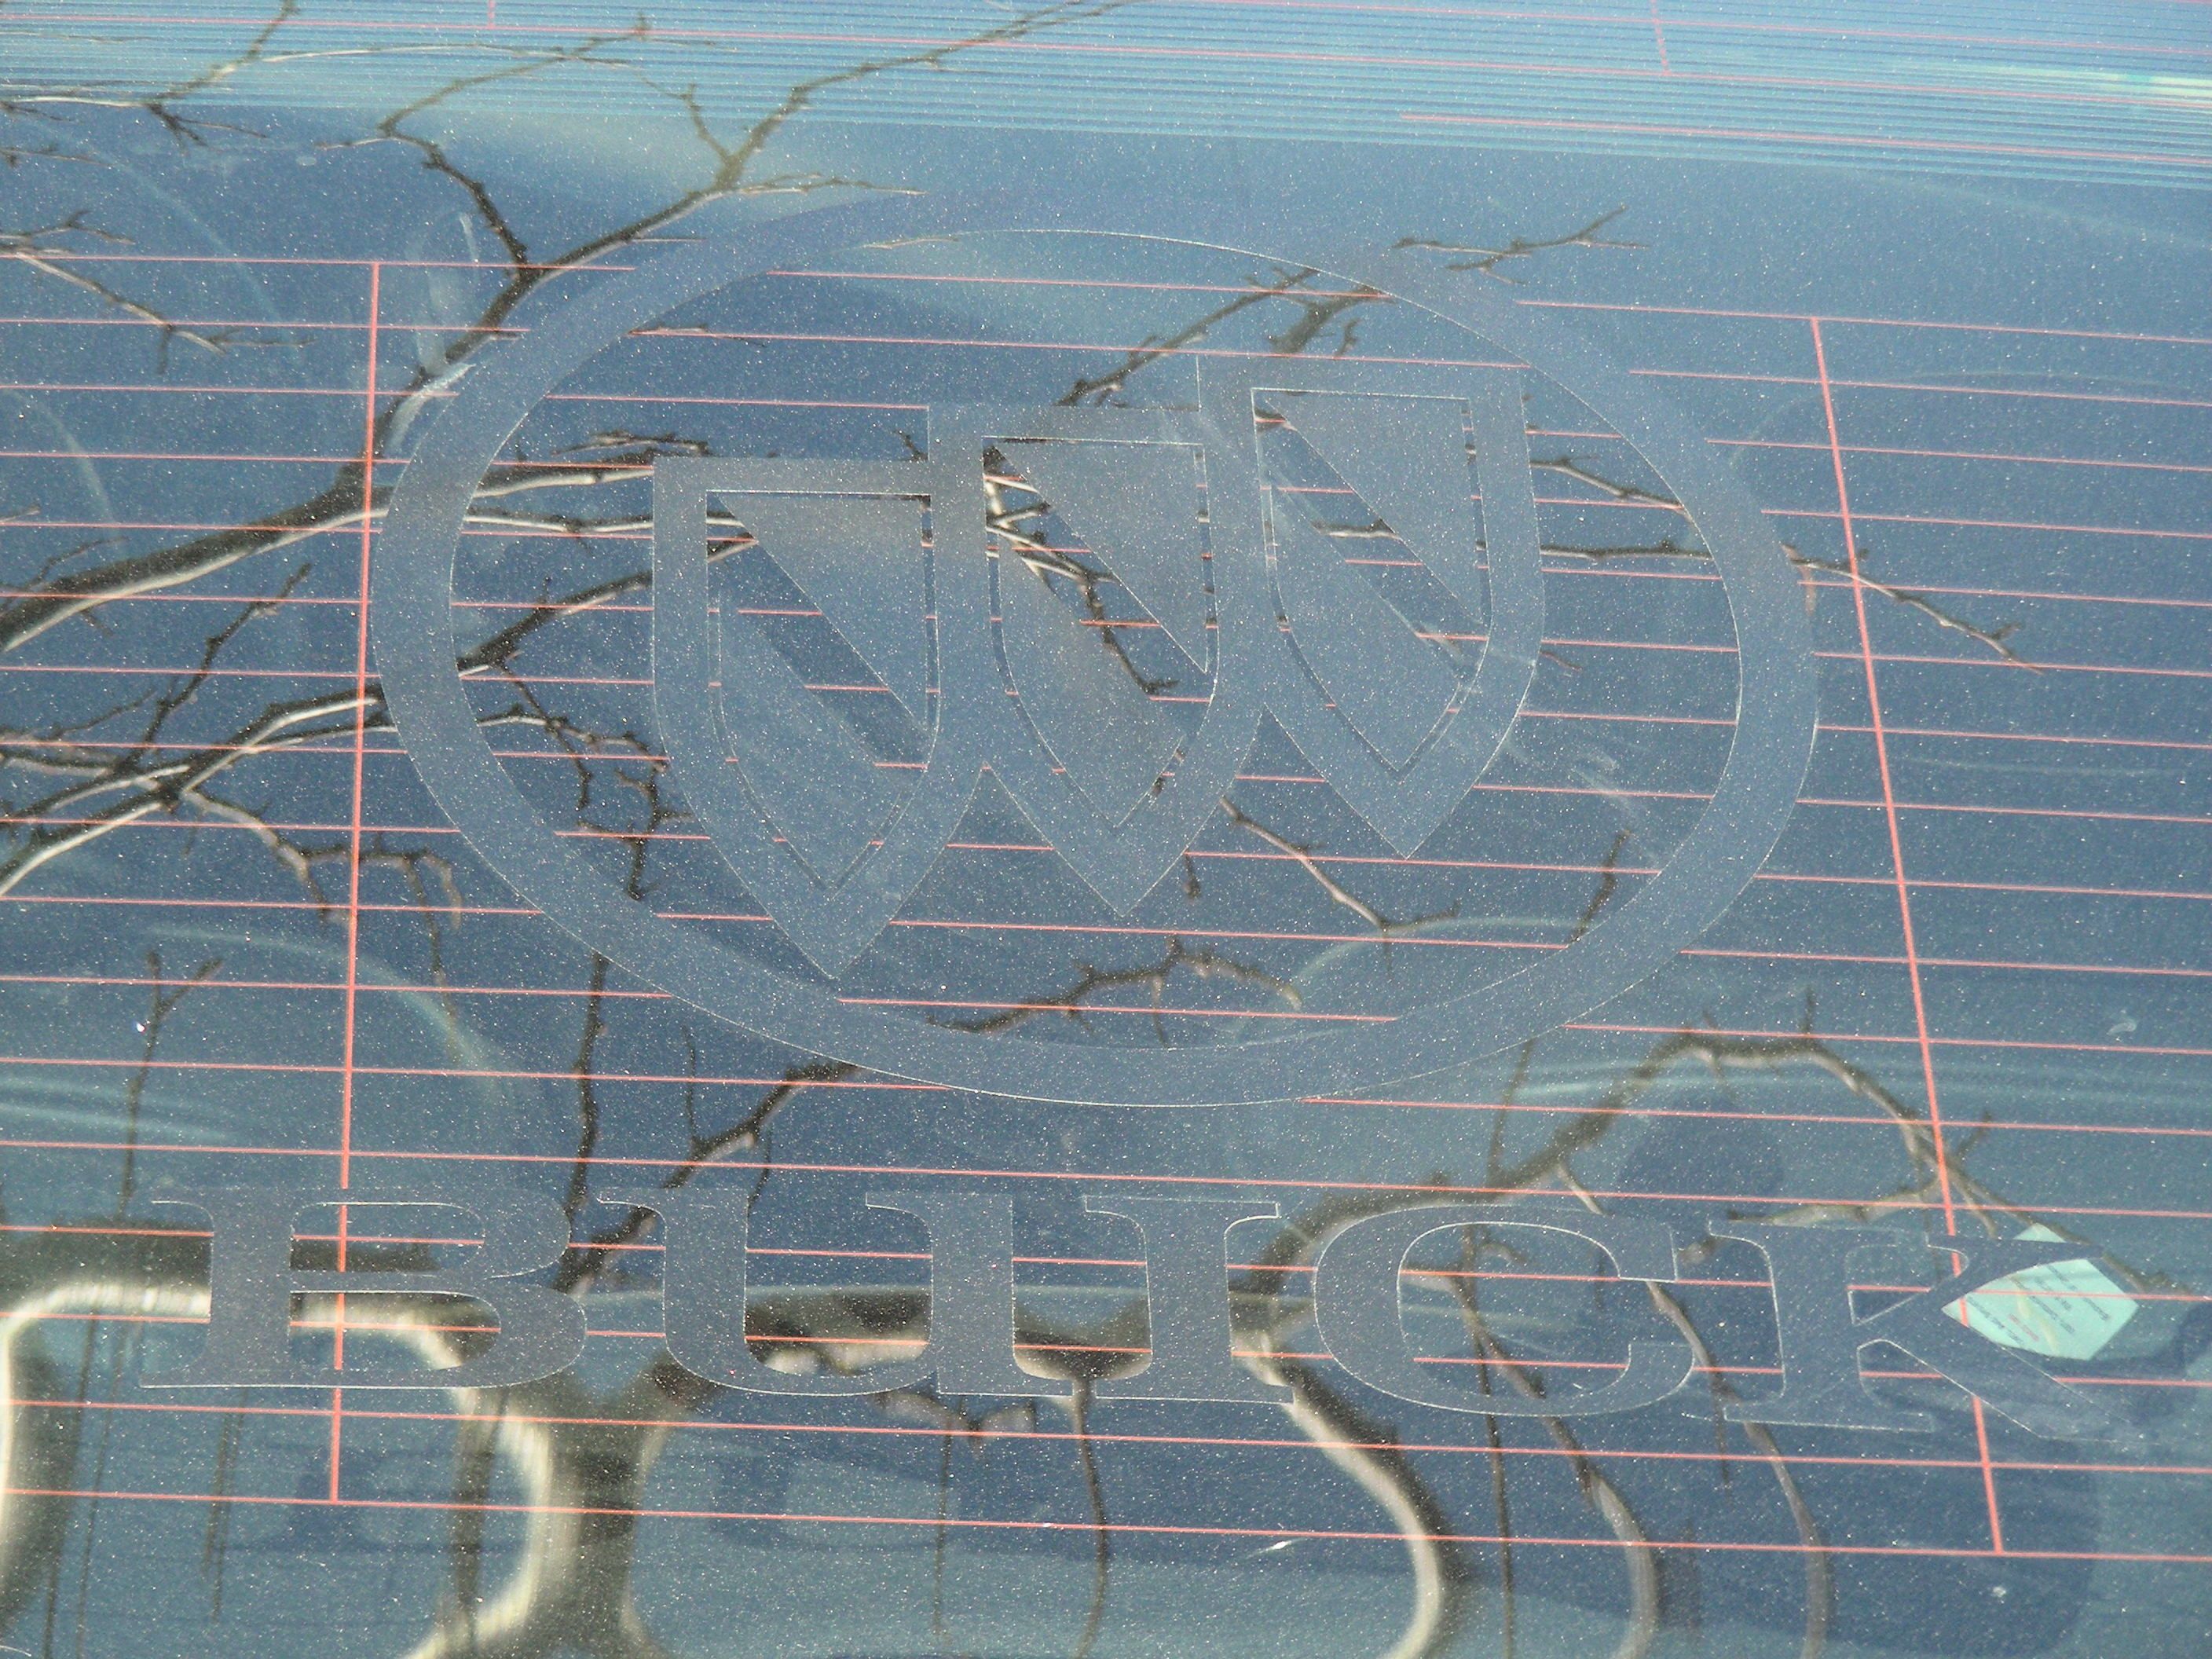 buick decal on rear window of my 97 regal